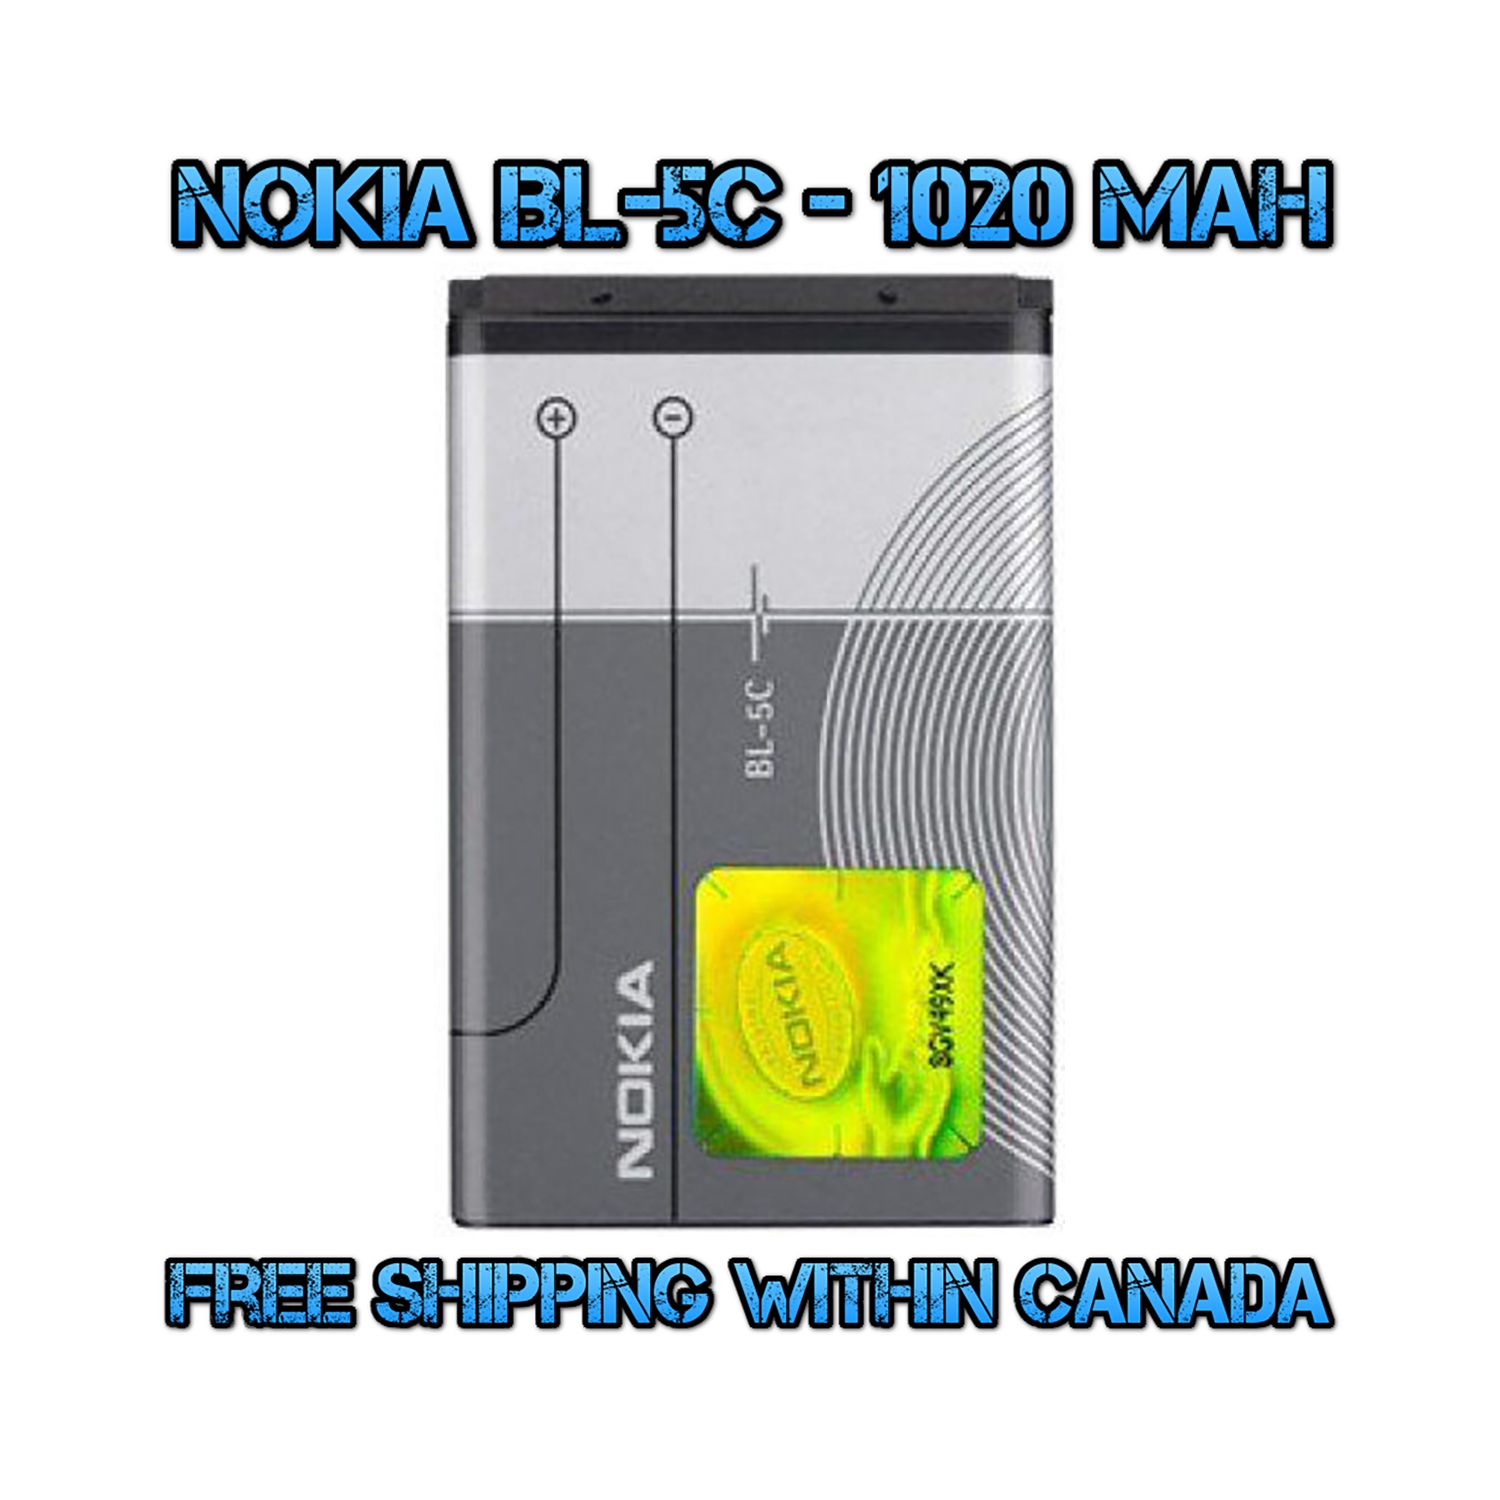 New OEM Replacement Battery Model BL-5C 1020 mAh for Nokia 1208 1680 3100 3555 6085 6086 6670 6682 E50 - (FREE SHIPPING)